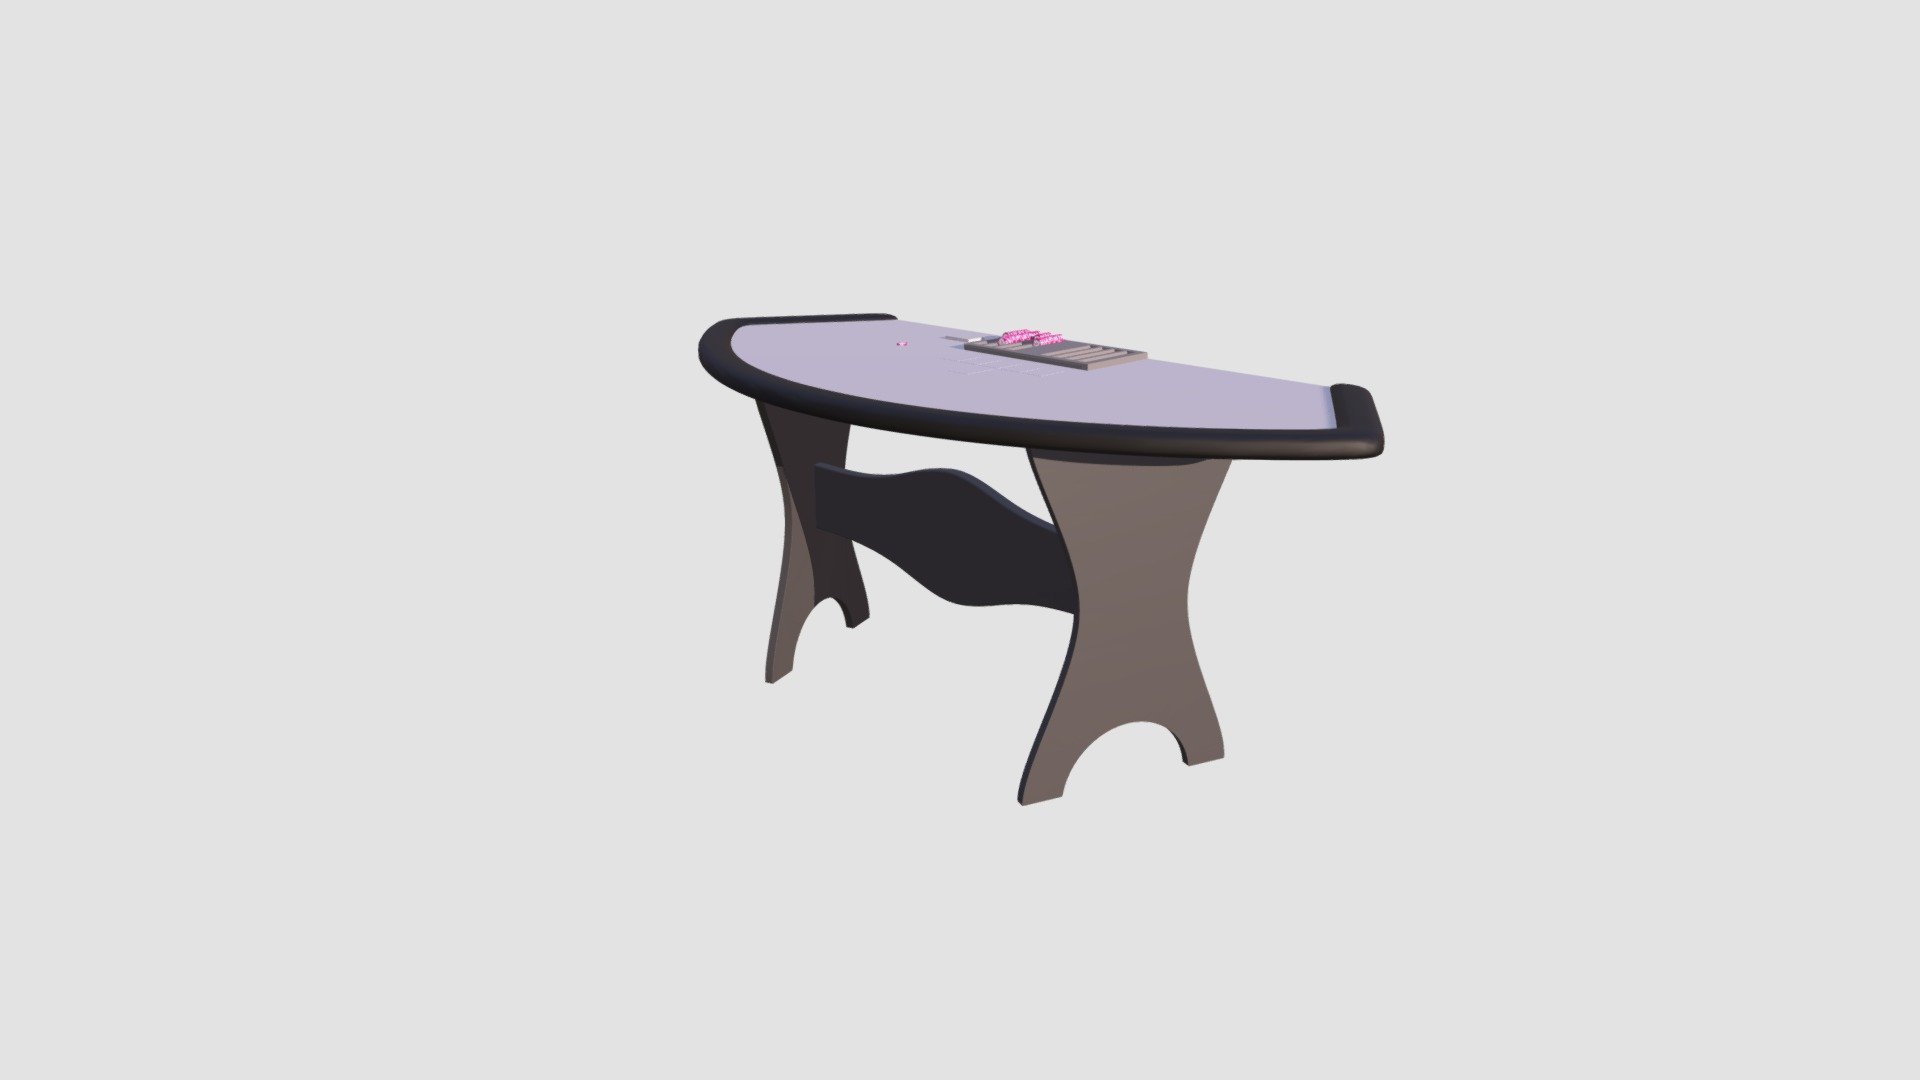 Highly detailed model of game table with all textures, shaders and materials. It is ready to use, just put it into your scene 3d model